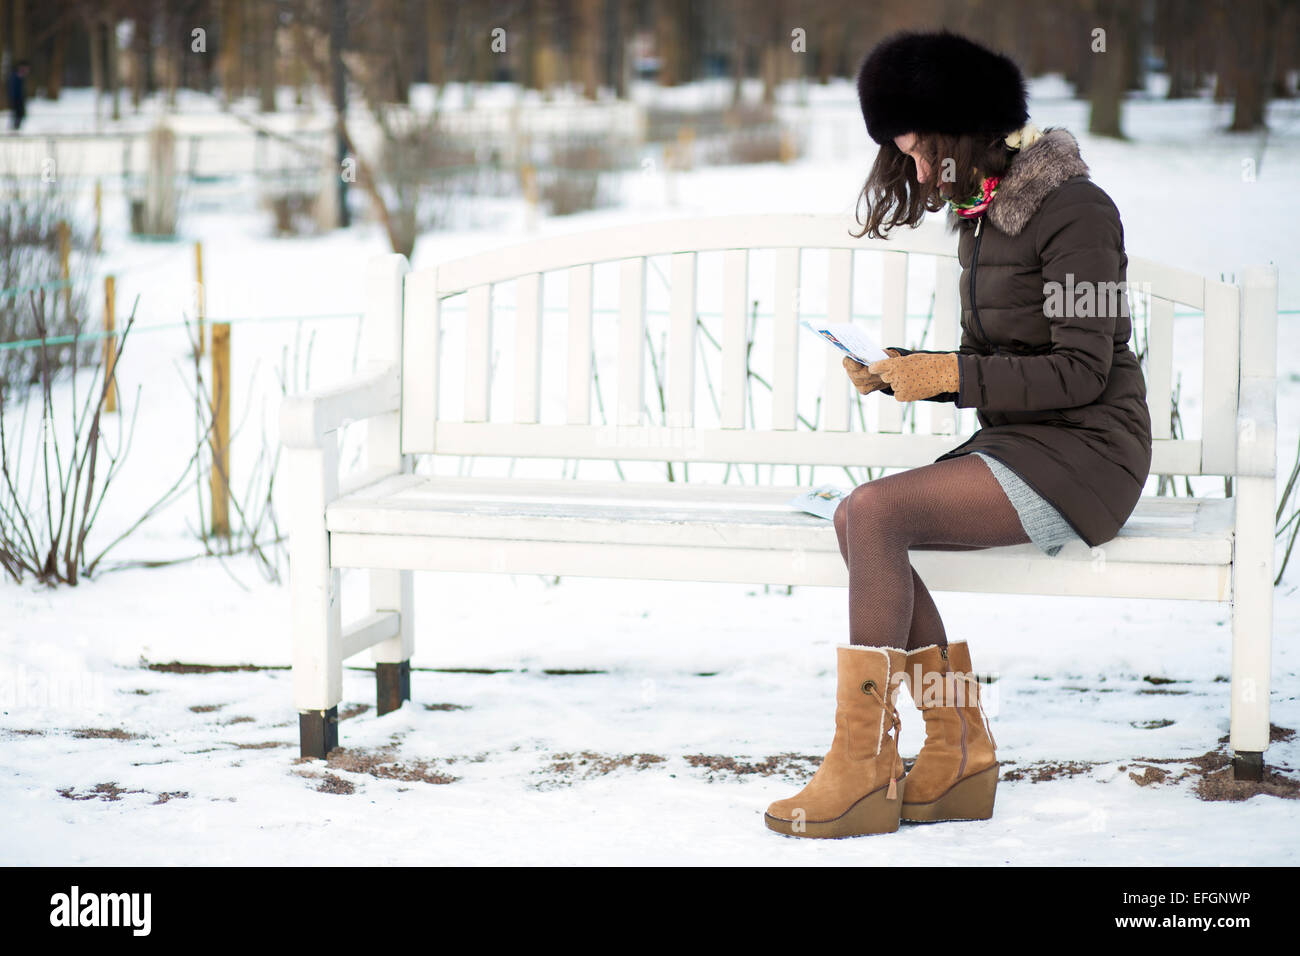 Lady on a bench sits reading a letter Stock Photo - Alamy